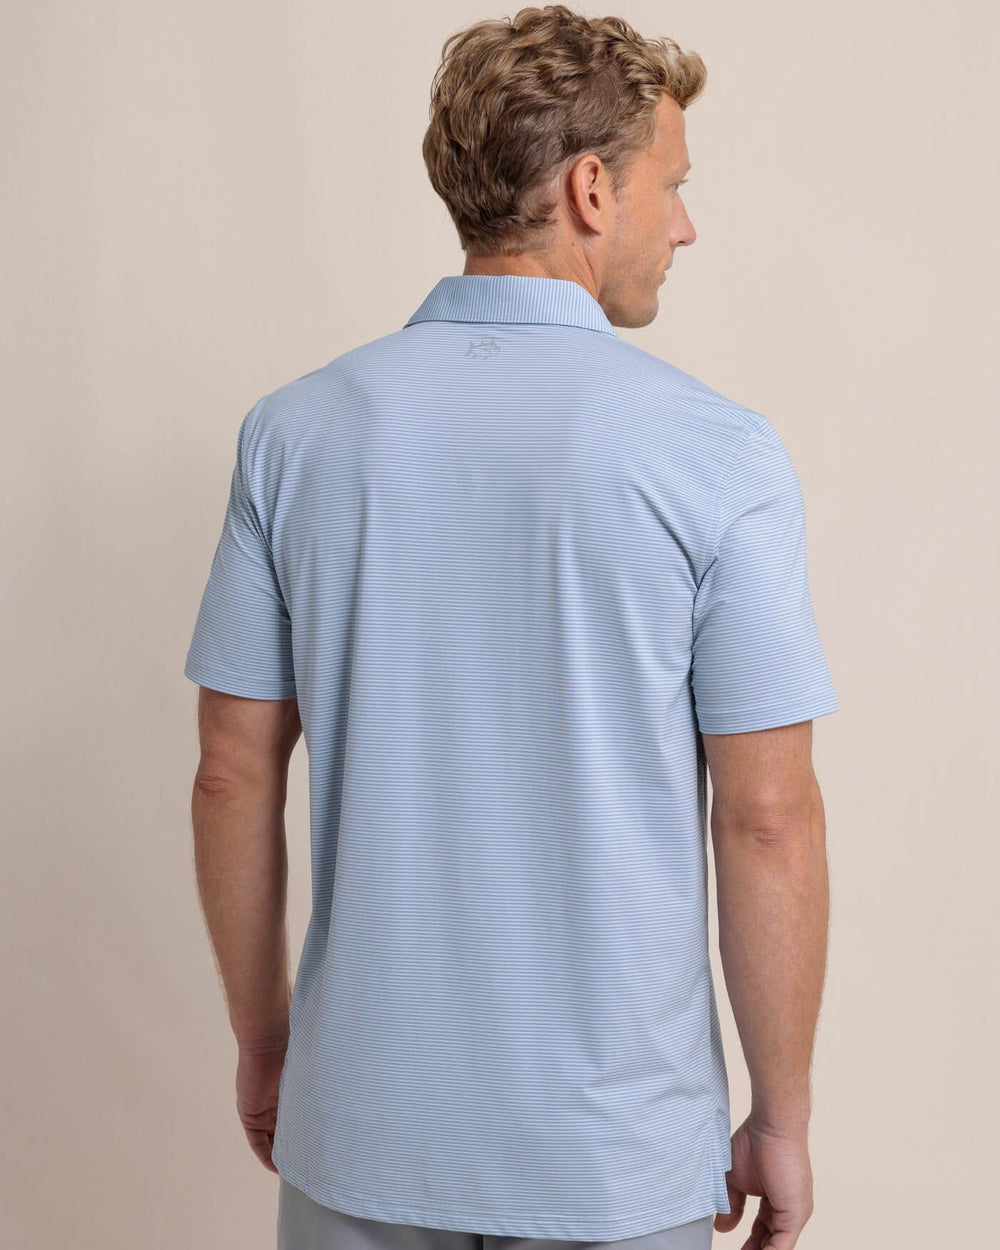 The back view of the Southern Tide brrr-eeze Meadowbrook Stripe Polo by Southern Tide - Triumph Blue